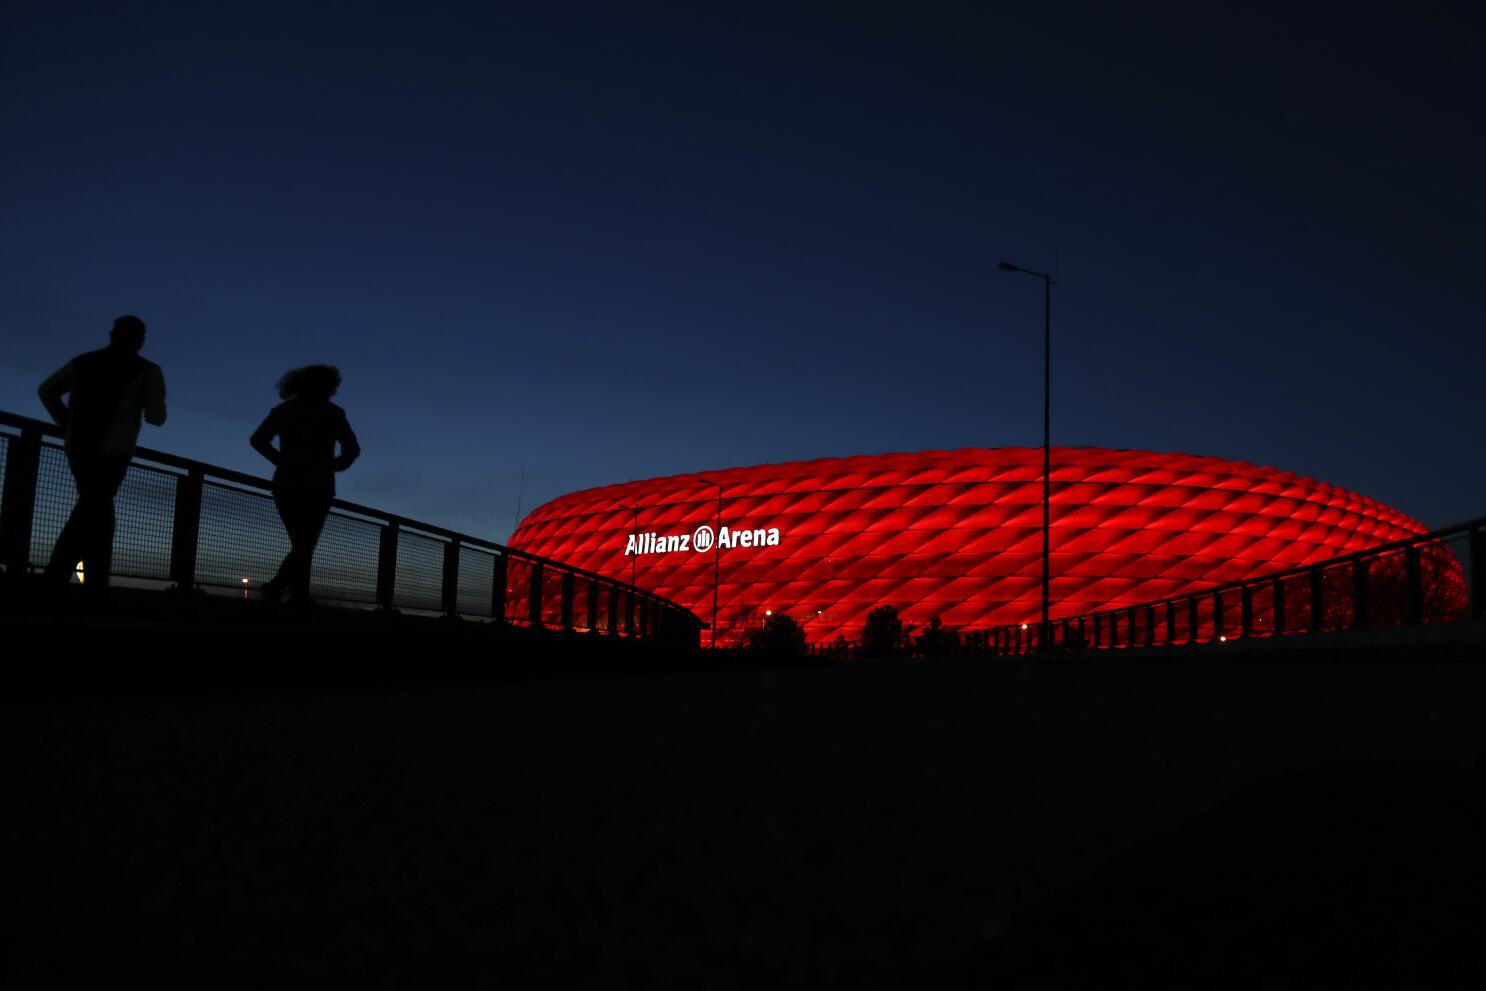 The Allianz Arena in Munich, Germany. The arena has been the home arena